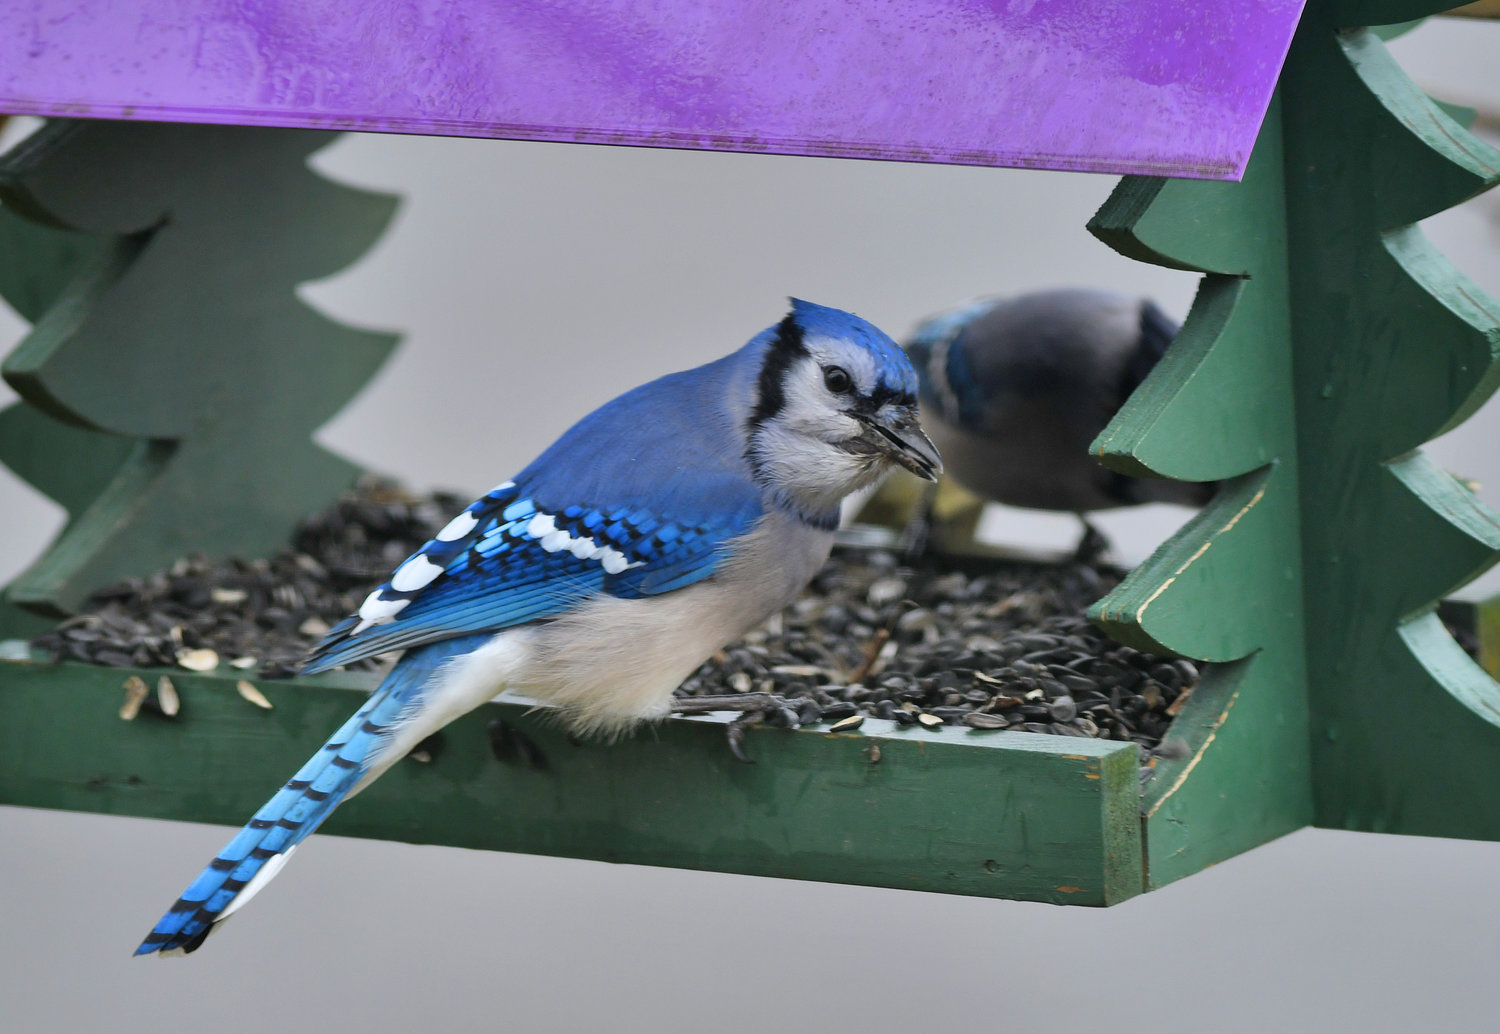 THANKS FOR THE FOOD — A solitary blue jay enjoys black oil sunflower from a bird feeder in this file photo.